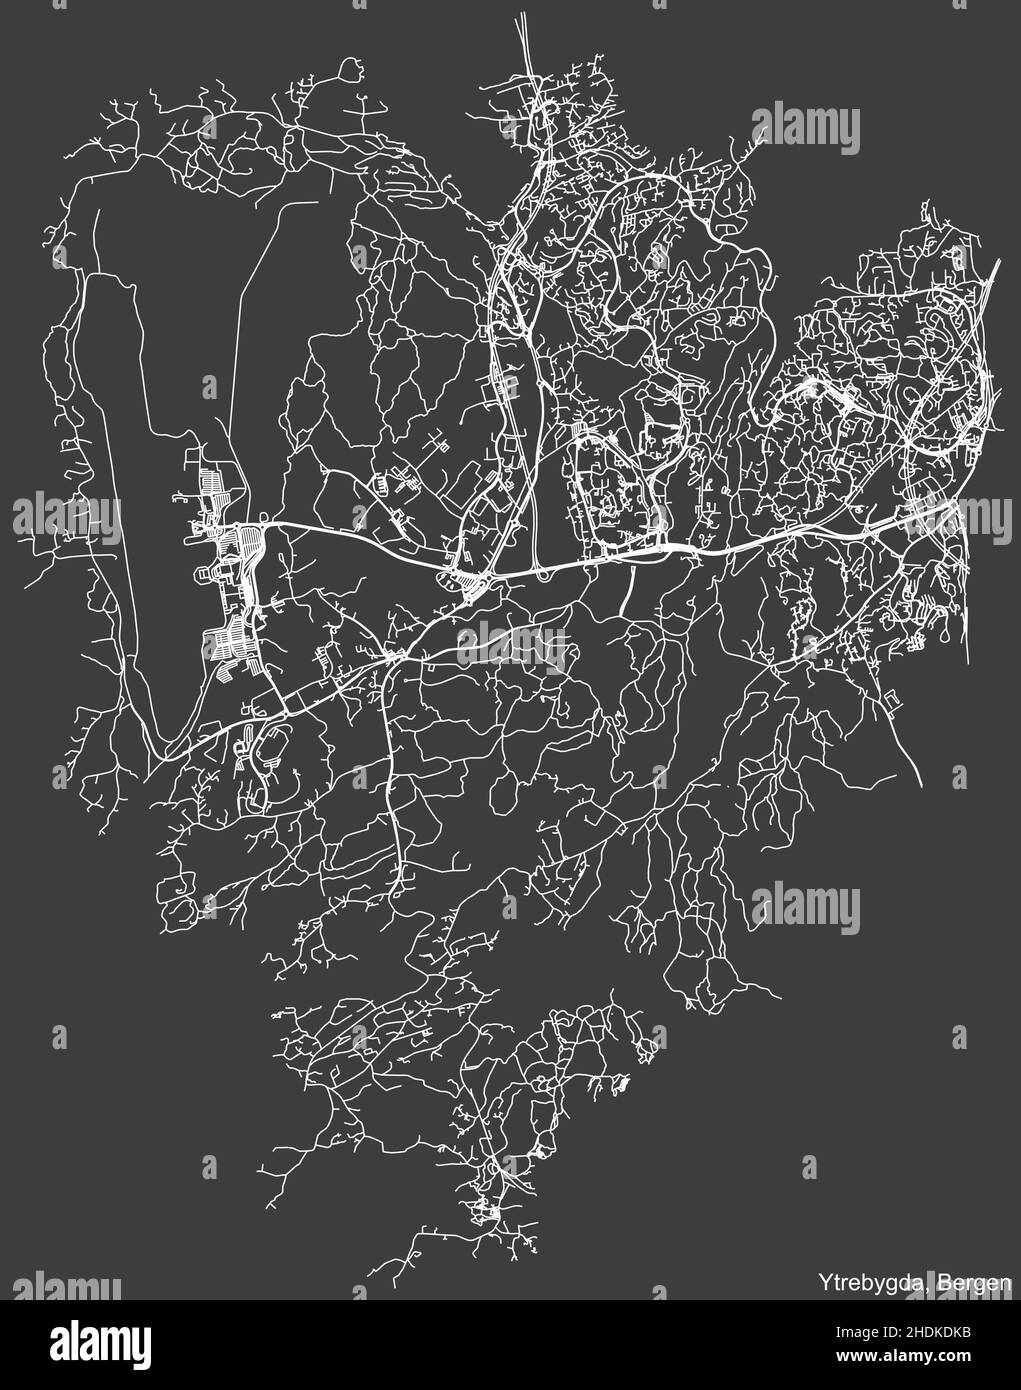 Detailed negative navigation white lines urban street roads map  of the quarter YTREBYGDA BOROUGH  of the Norwegian regional capital city of Bergen, N Stock Vector